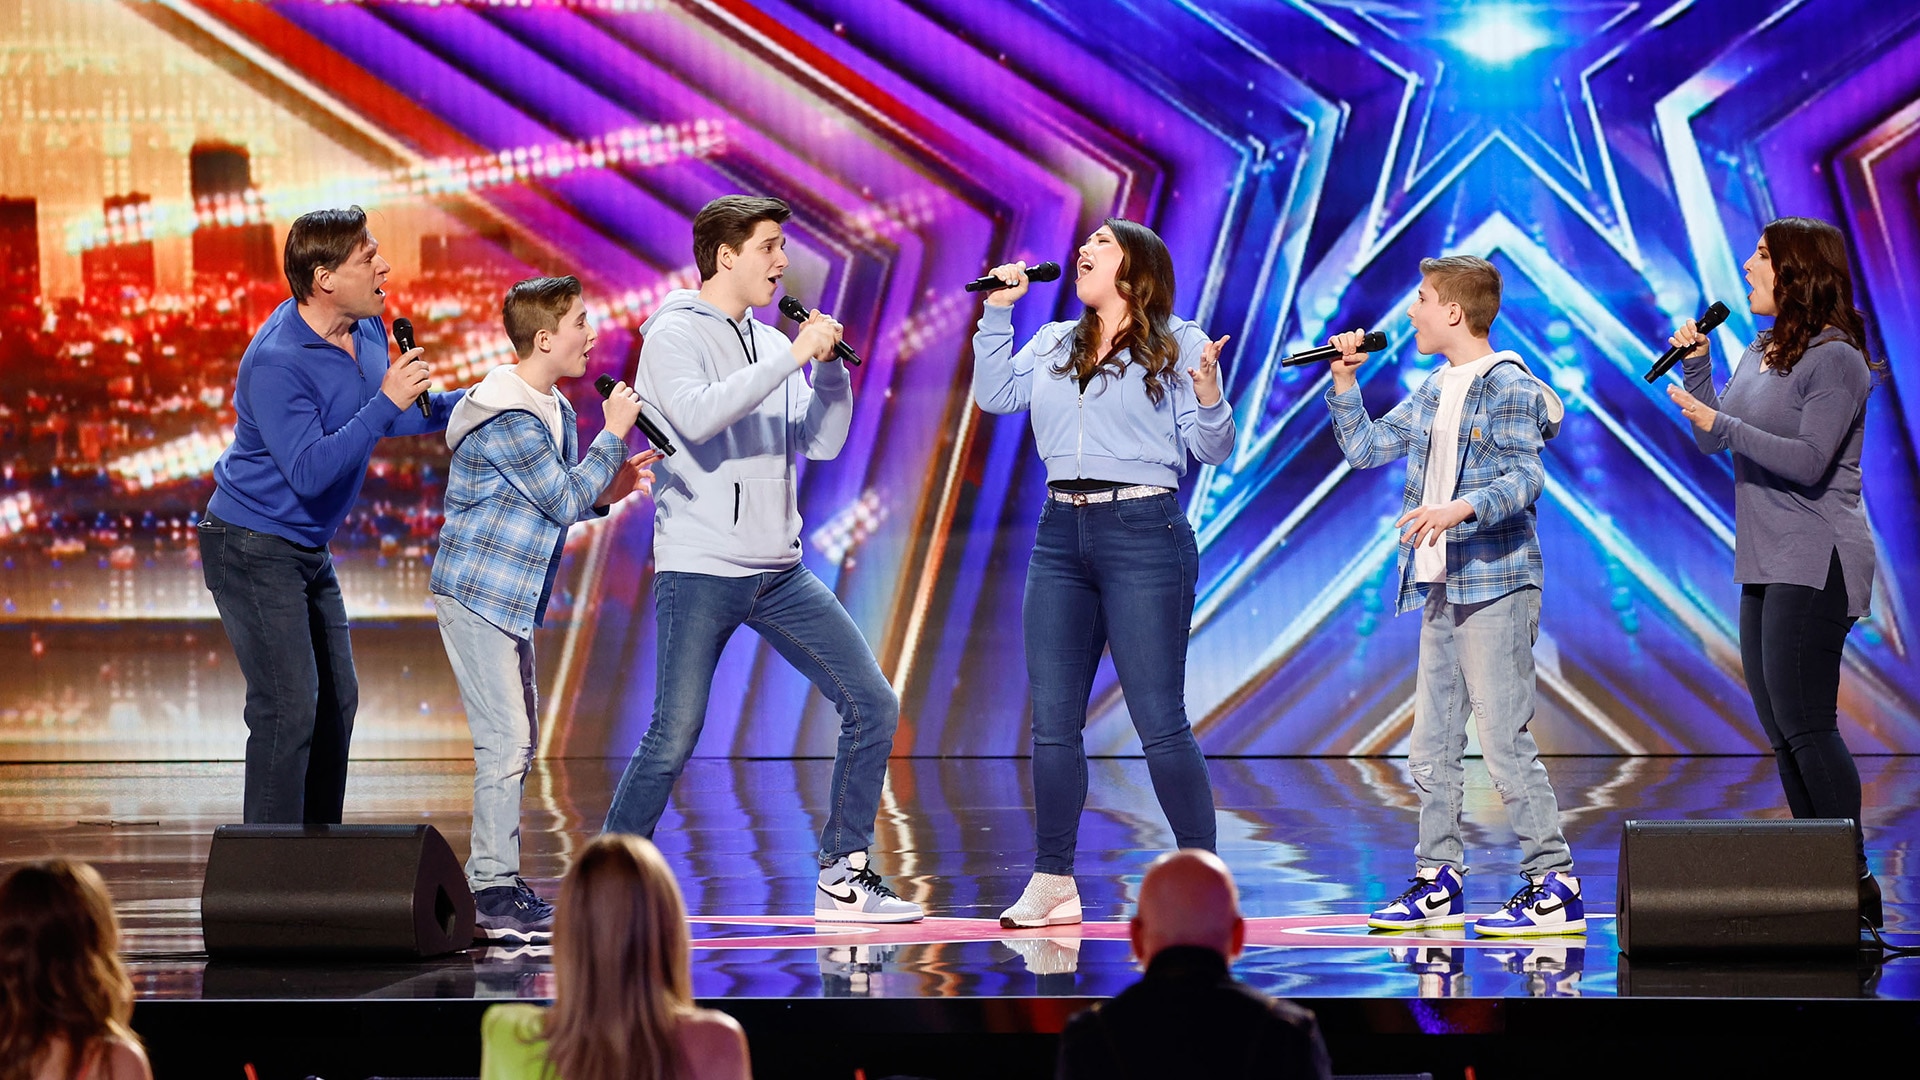 Watch America's Got Talent Highlight The Sharpe Family Singers Mesmerize the Crowd with "How